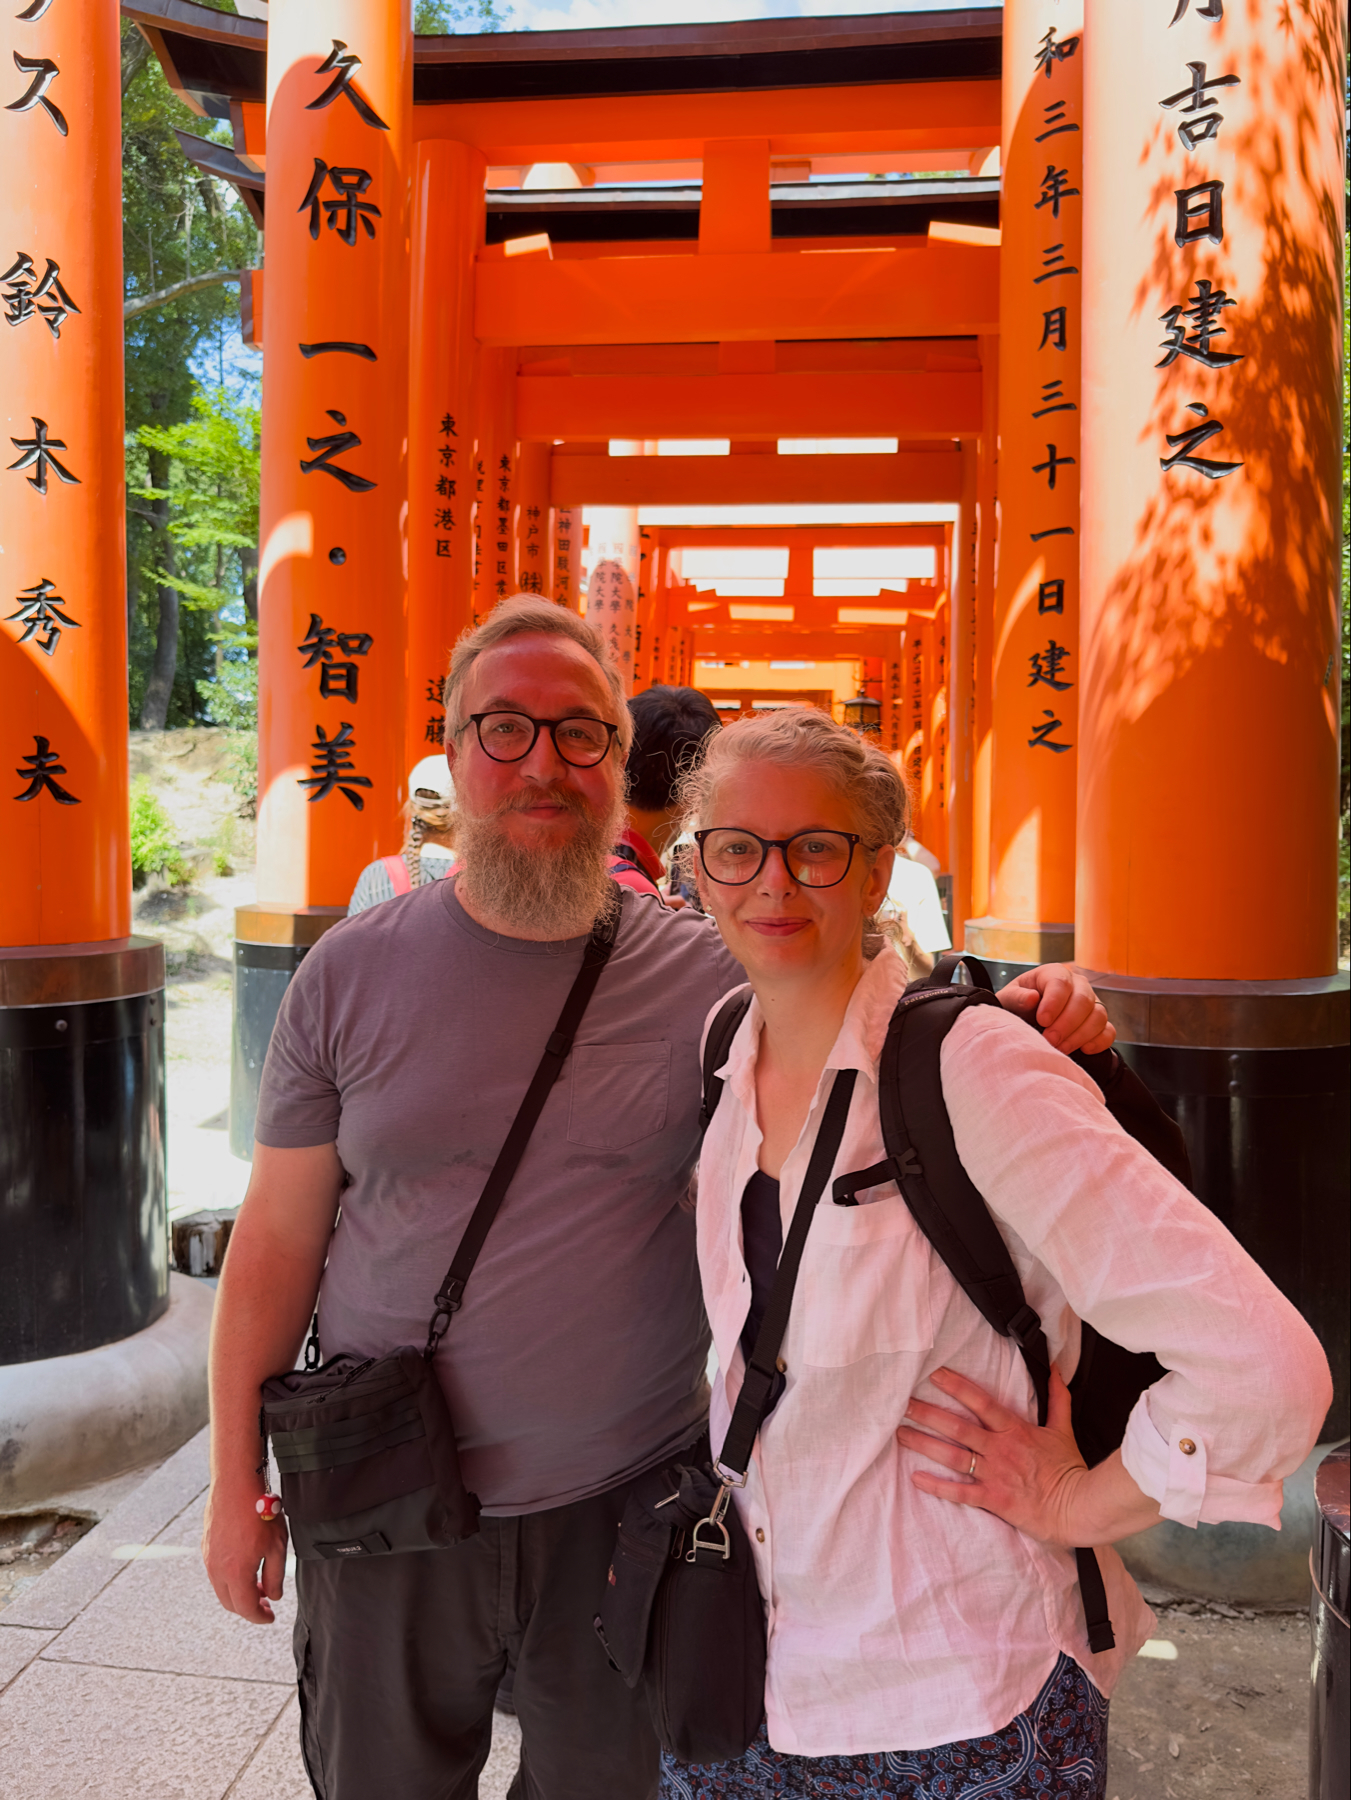 Myself and my Wife posing together under the red torii gates at Fushimi Inari Shrine in Kyoto, Japan.